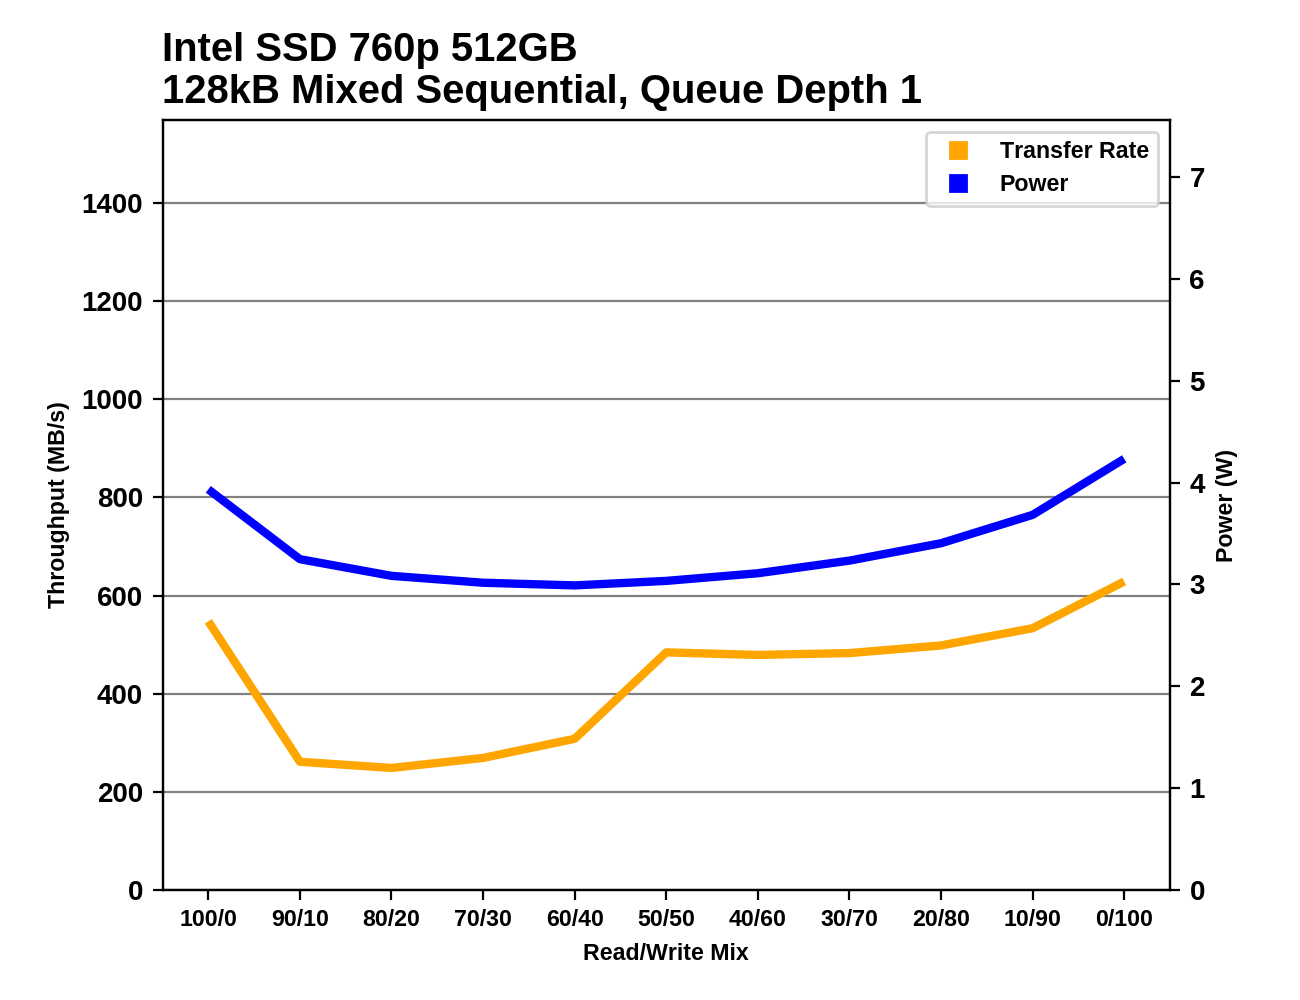 Mixed Read/Write Performance - The Intel SSD 760p 512GB Review